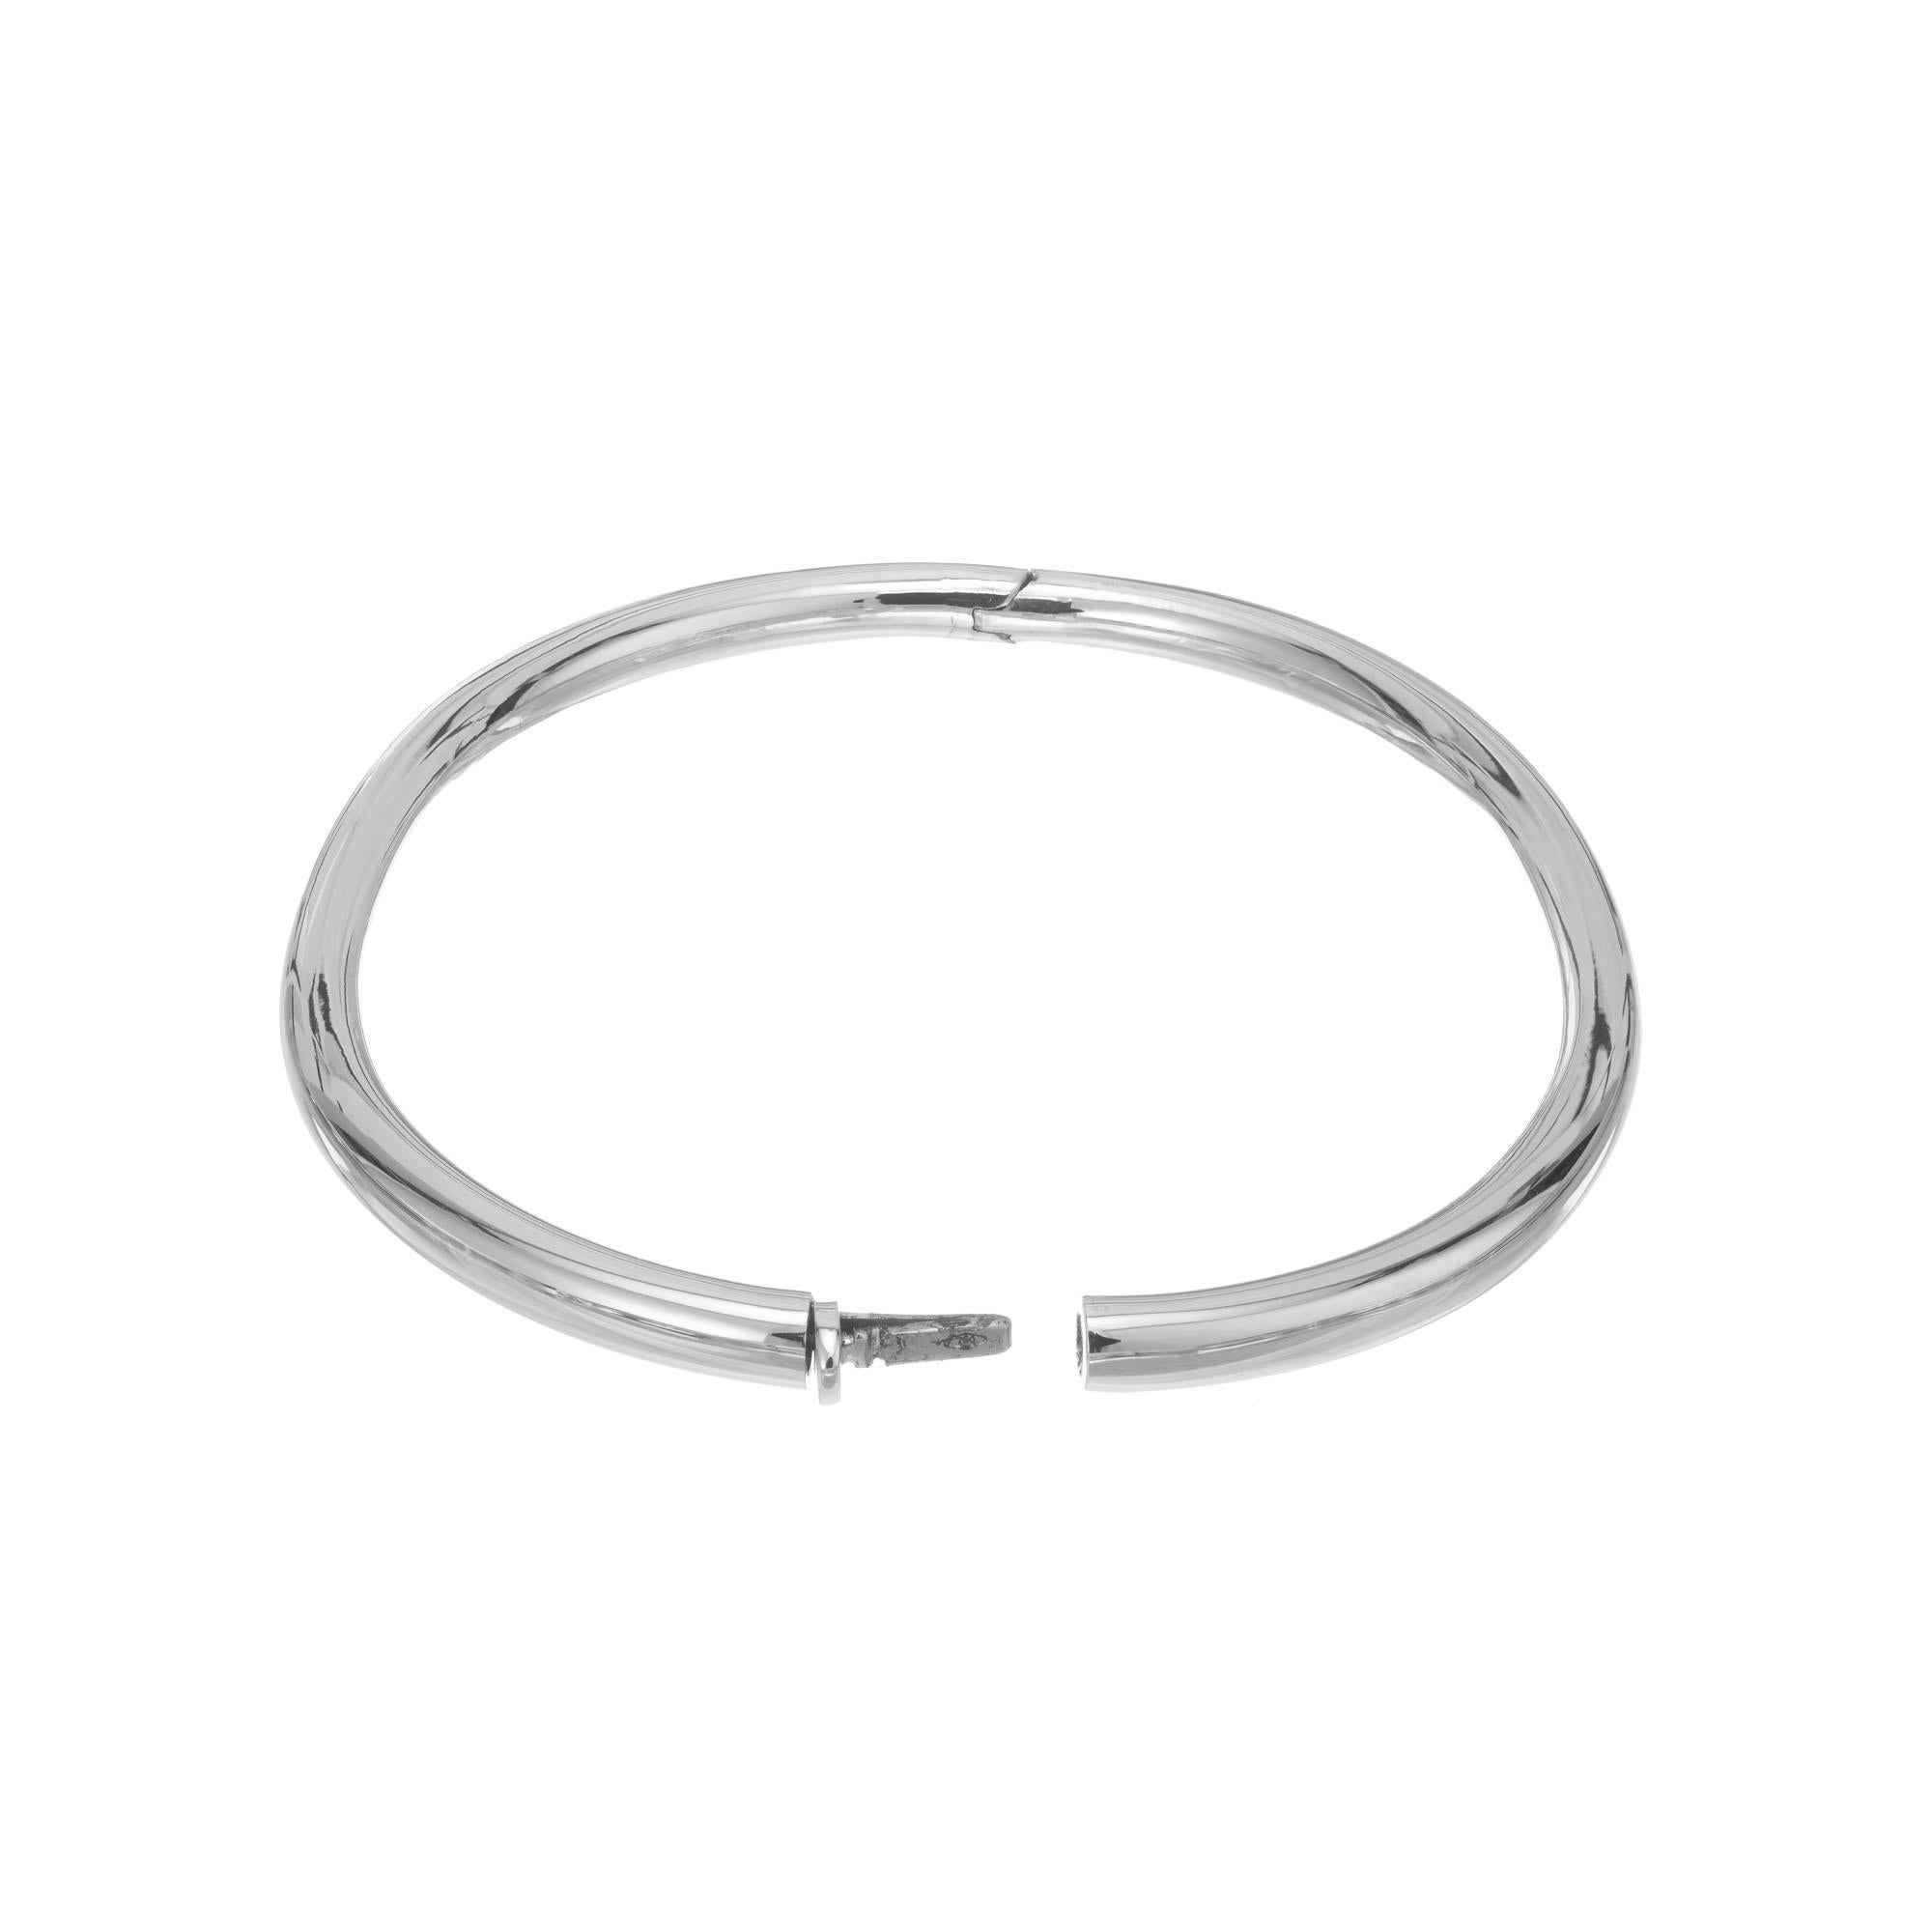 18k white gold 4mm Italian made bangle bracelet. Fits up to 7.5 wrist. 

18k white gold 
Stamped: 750
21.3 grams
Width: 4.0 mm
Thickness/depth: 3.9mm
Inside dimensions: 2.5 x 2 Inches 
